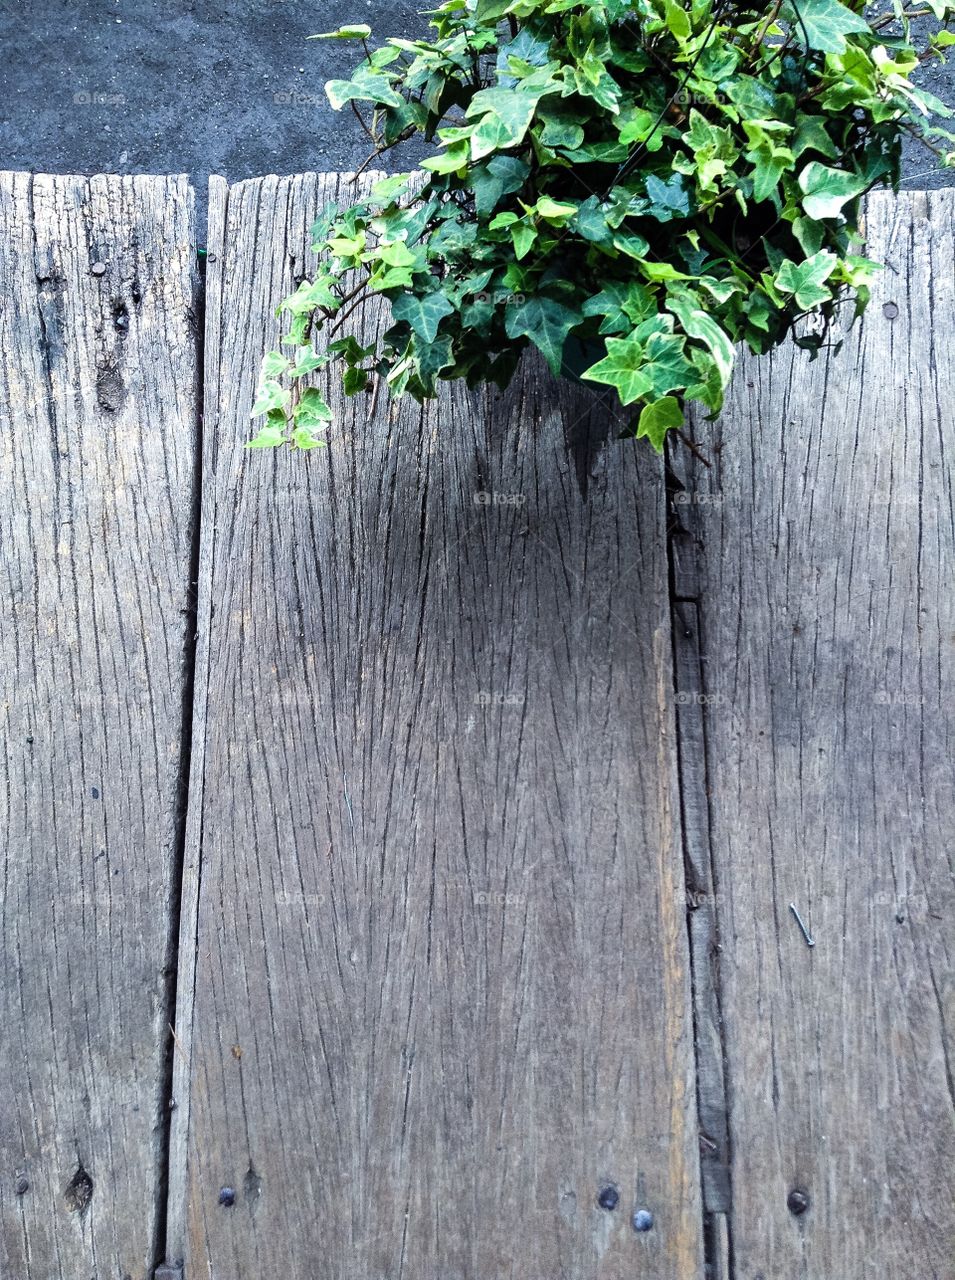 Green ivy with gray old wood